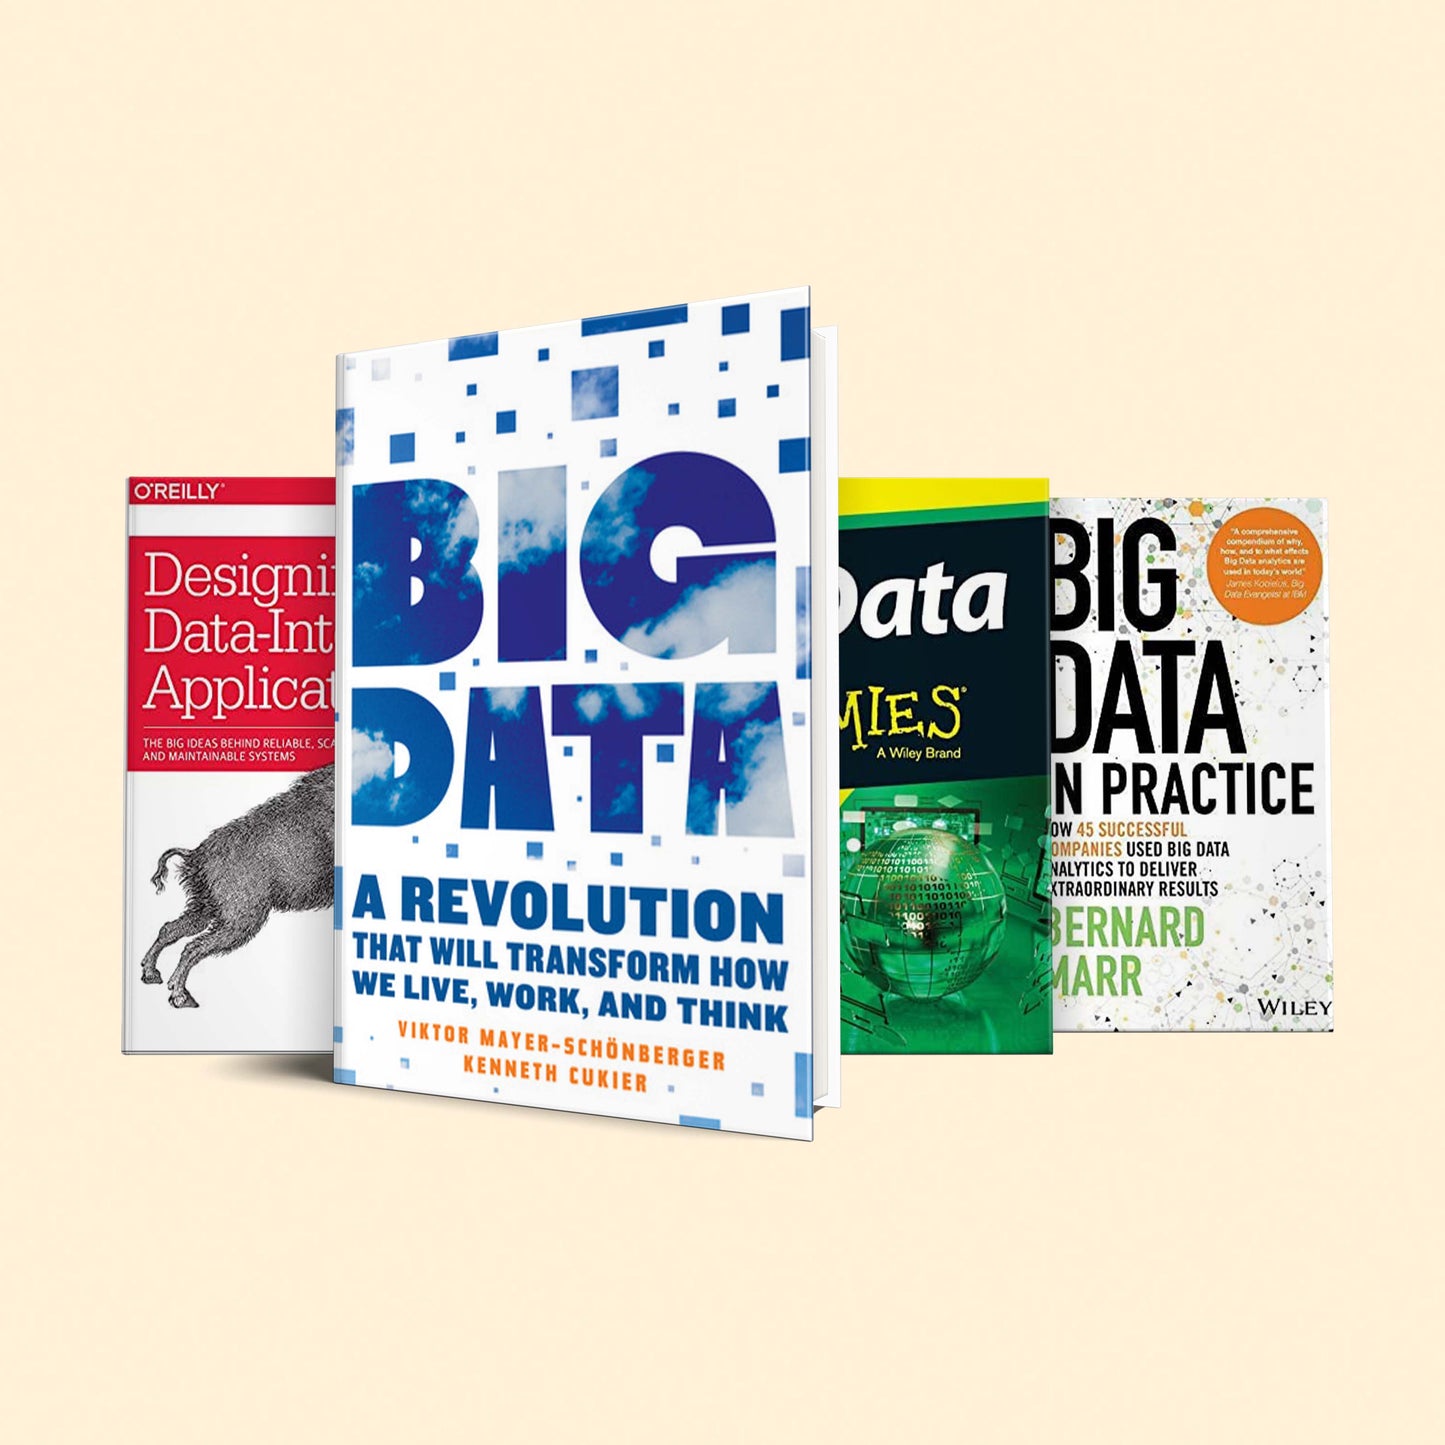 4 Big data book set : Big Data: A Revolution That Will Transform How We Live, Work, and Think, Big Data For Dummies, Designing Data-Intensive Applications, Big Data in Practice